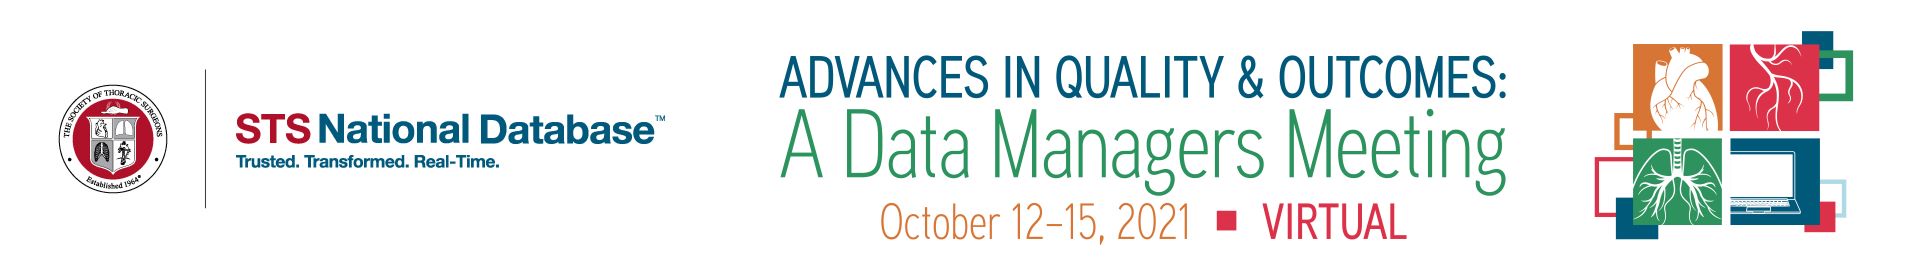 Advances in Quality & Outcomes: A Data Managers Meeting Event Banner